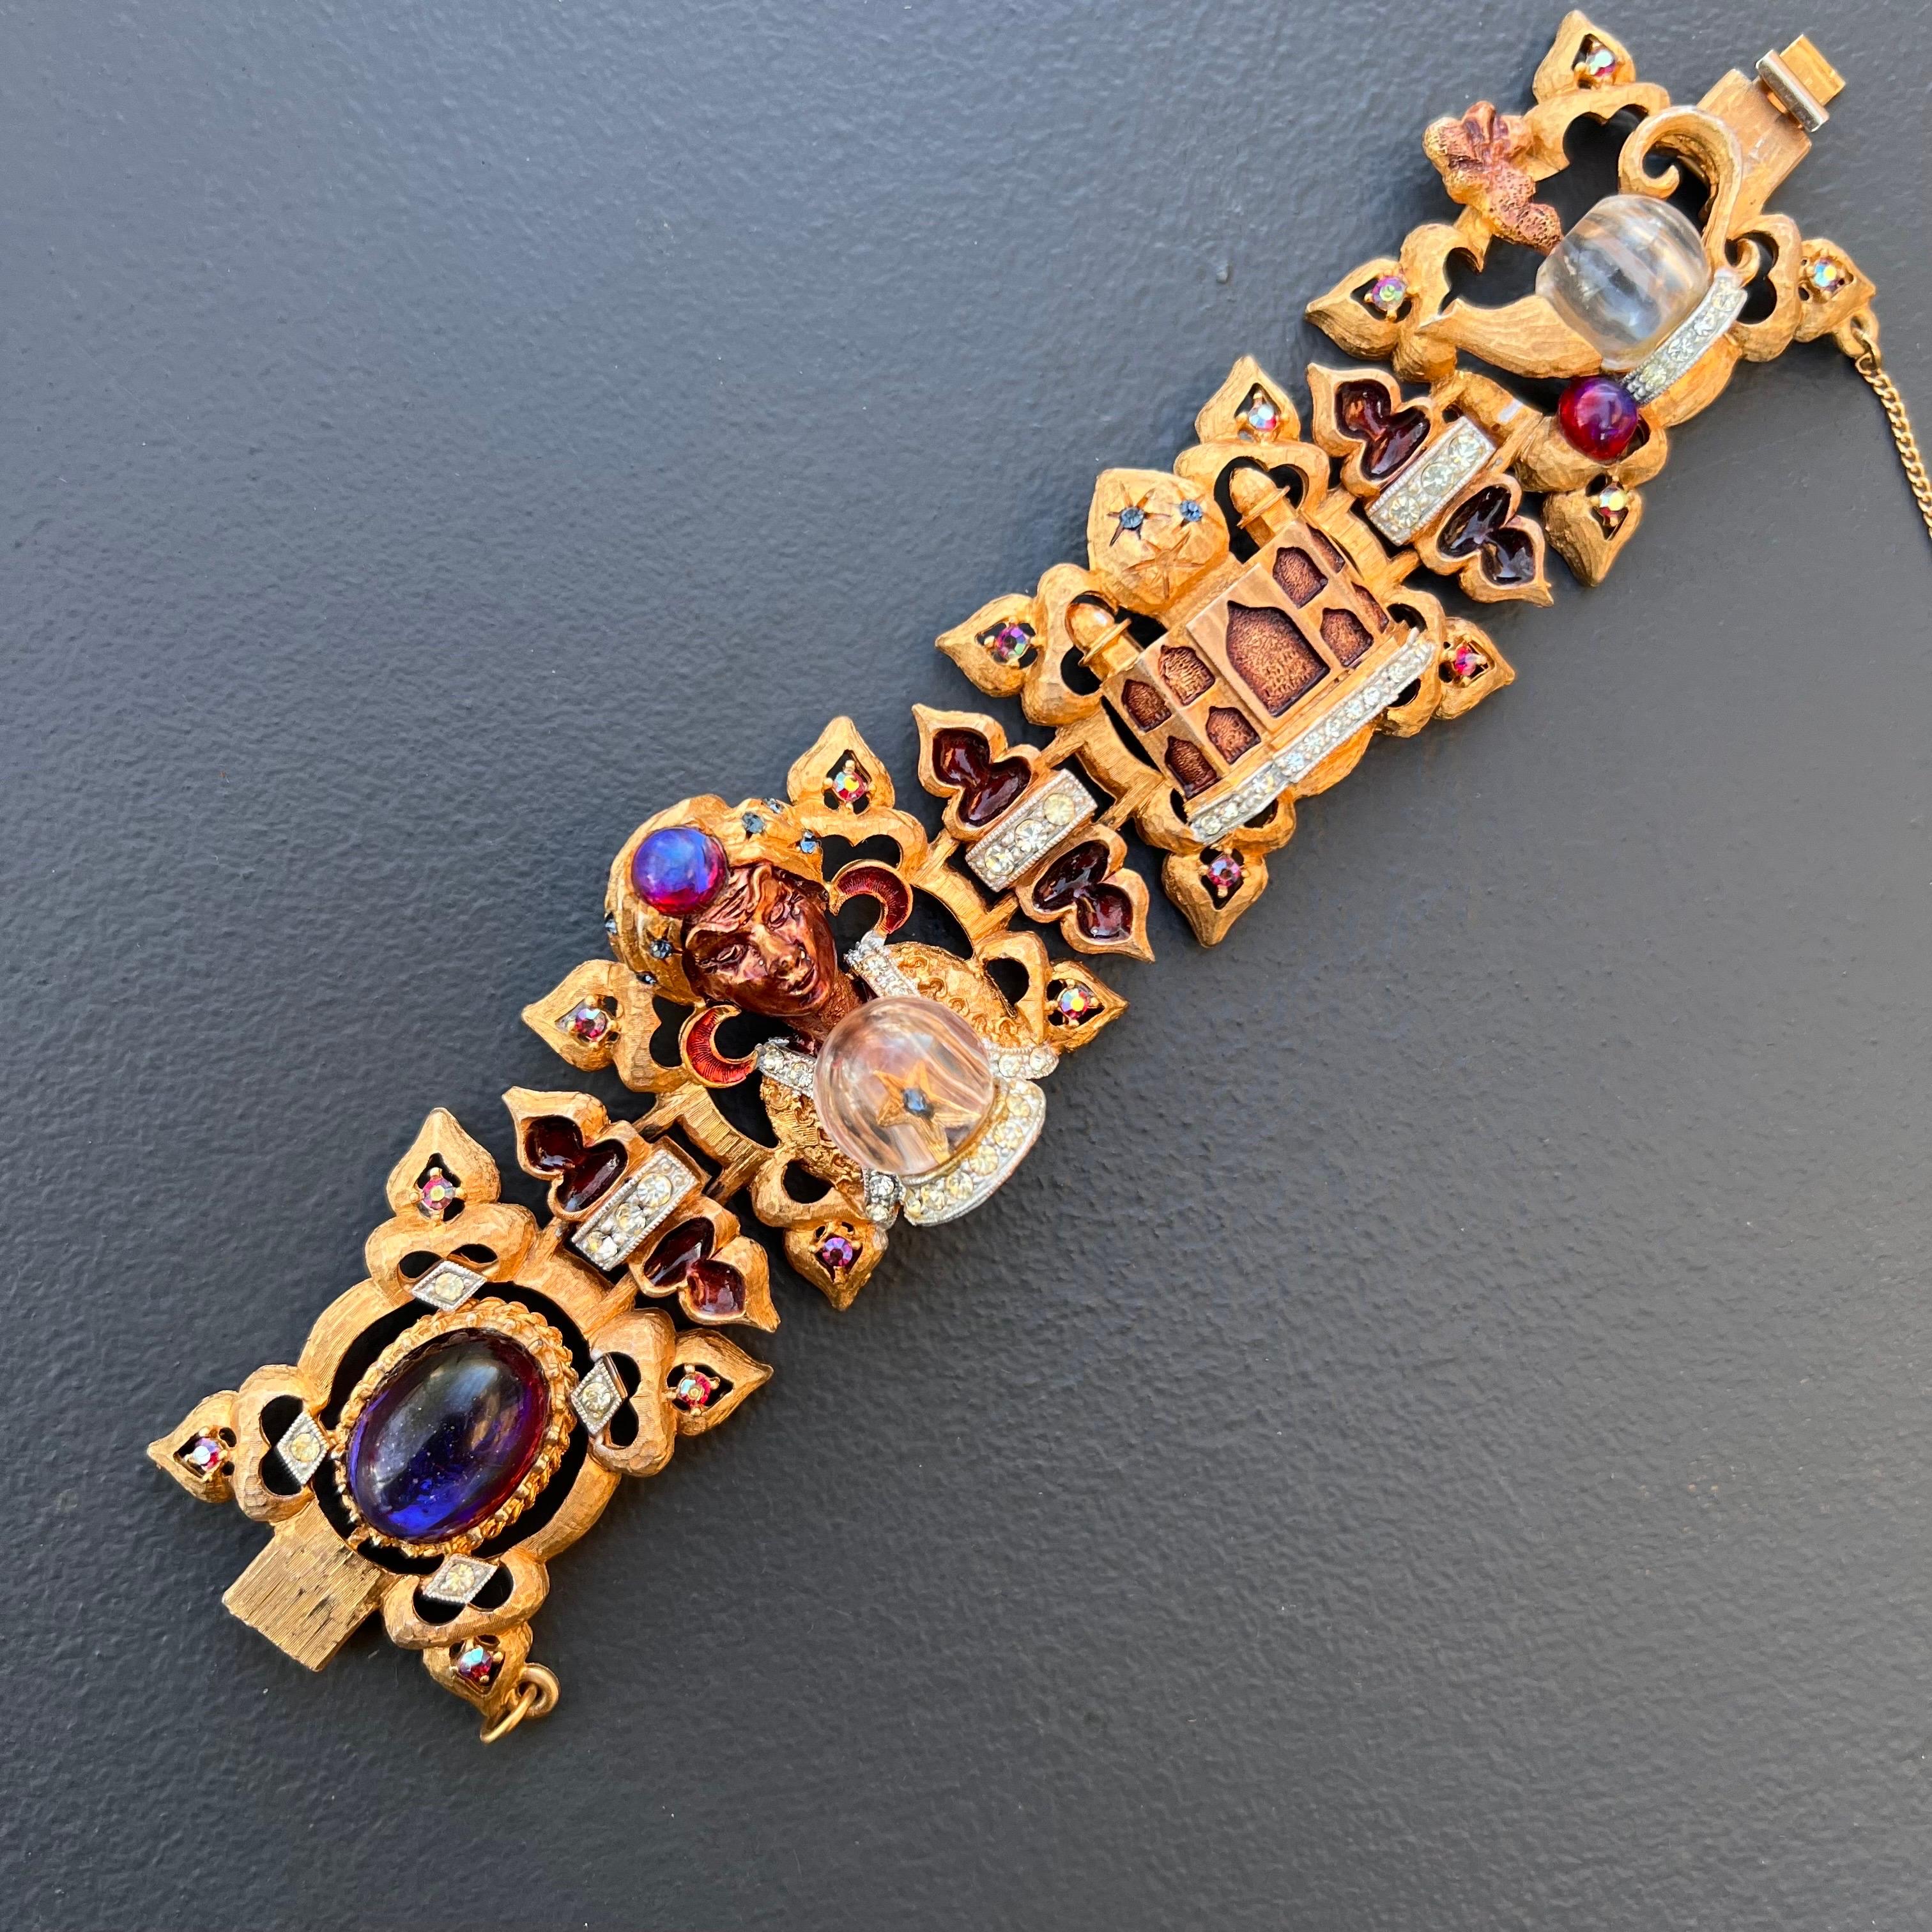 Absolutely stunning vintage 1950's  unmarked HAR bracelet from its Fantasy Series featuring a genie with crystal ball , Taj mahal and what looks like Aladdin's Lamp. Bracelet is very well made in different layers and is adorned with Rhinestones ,